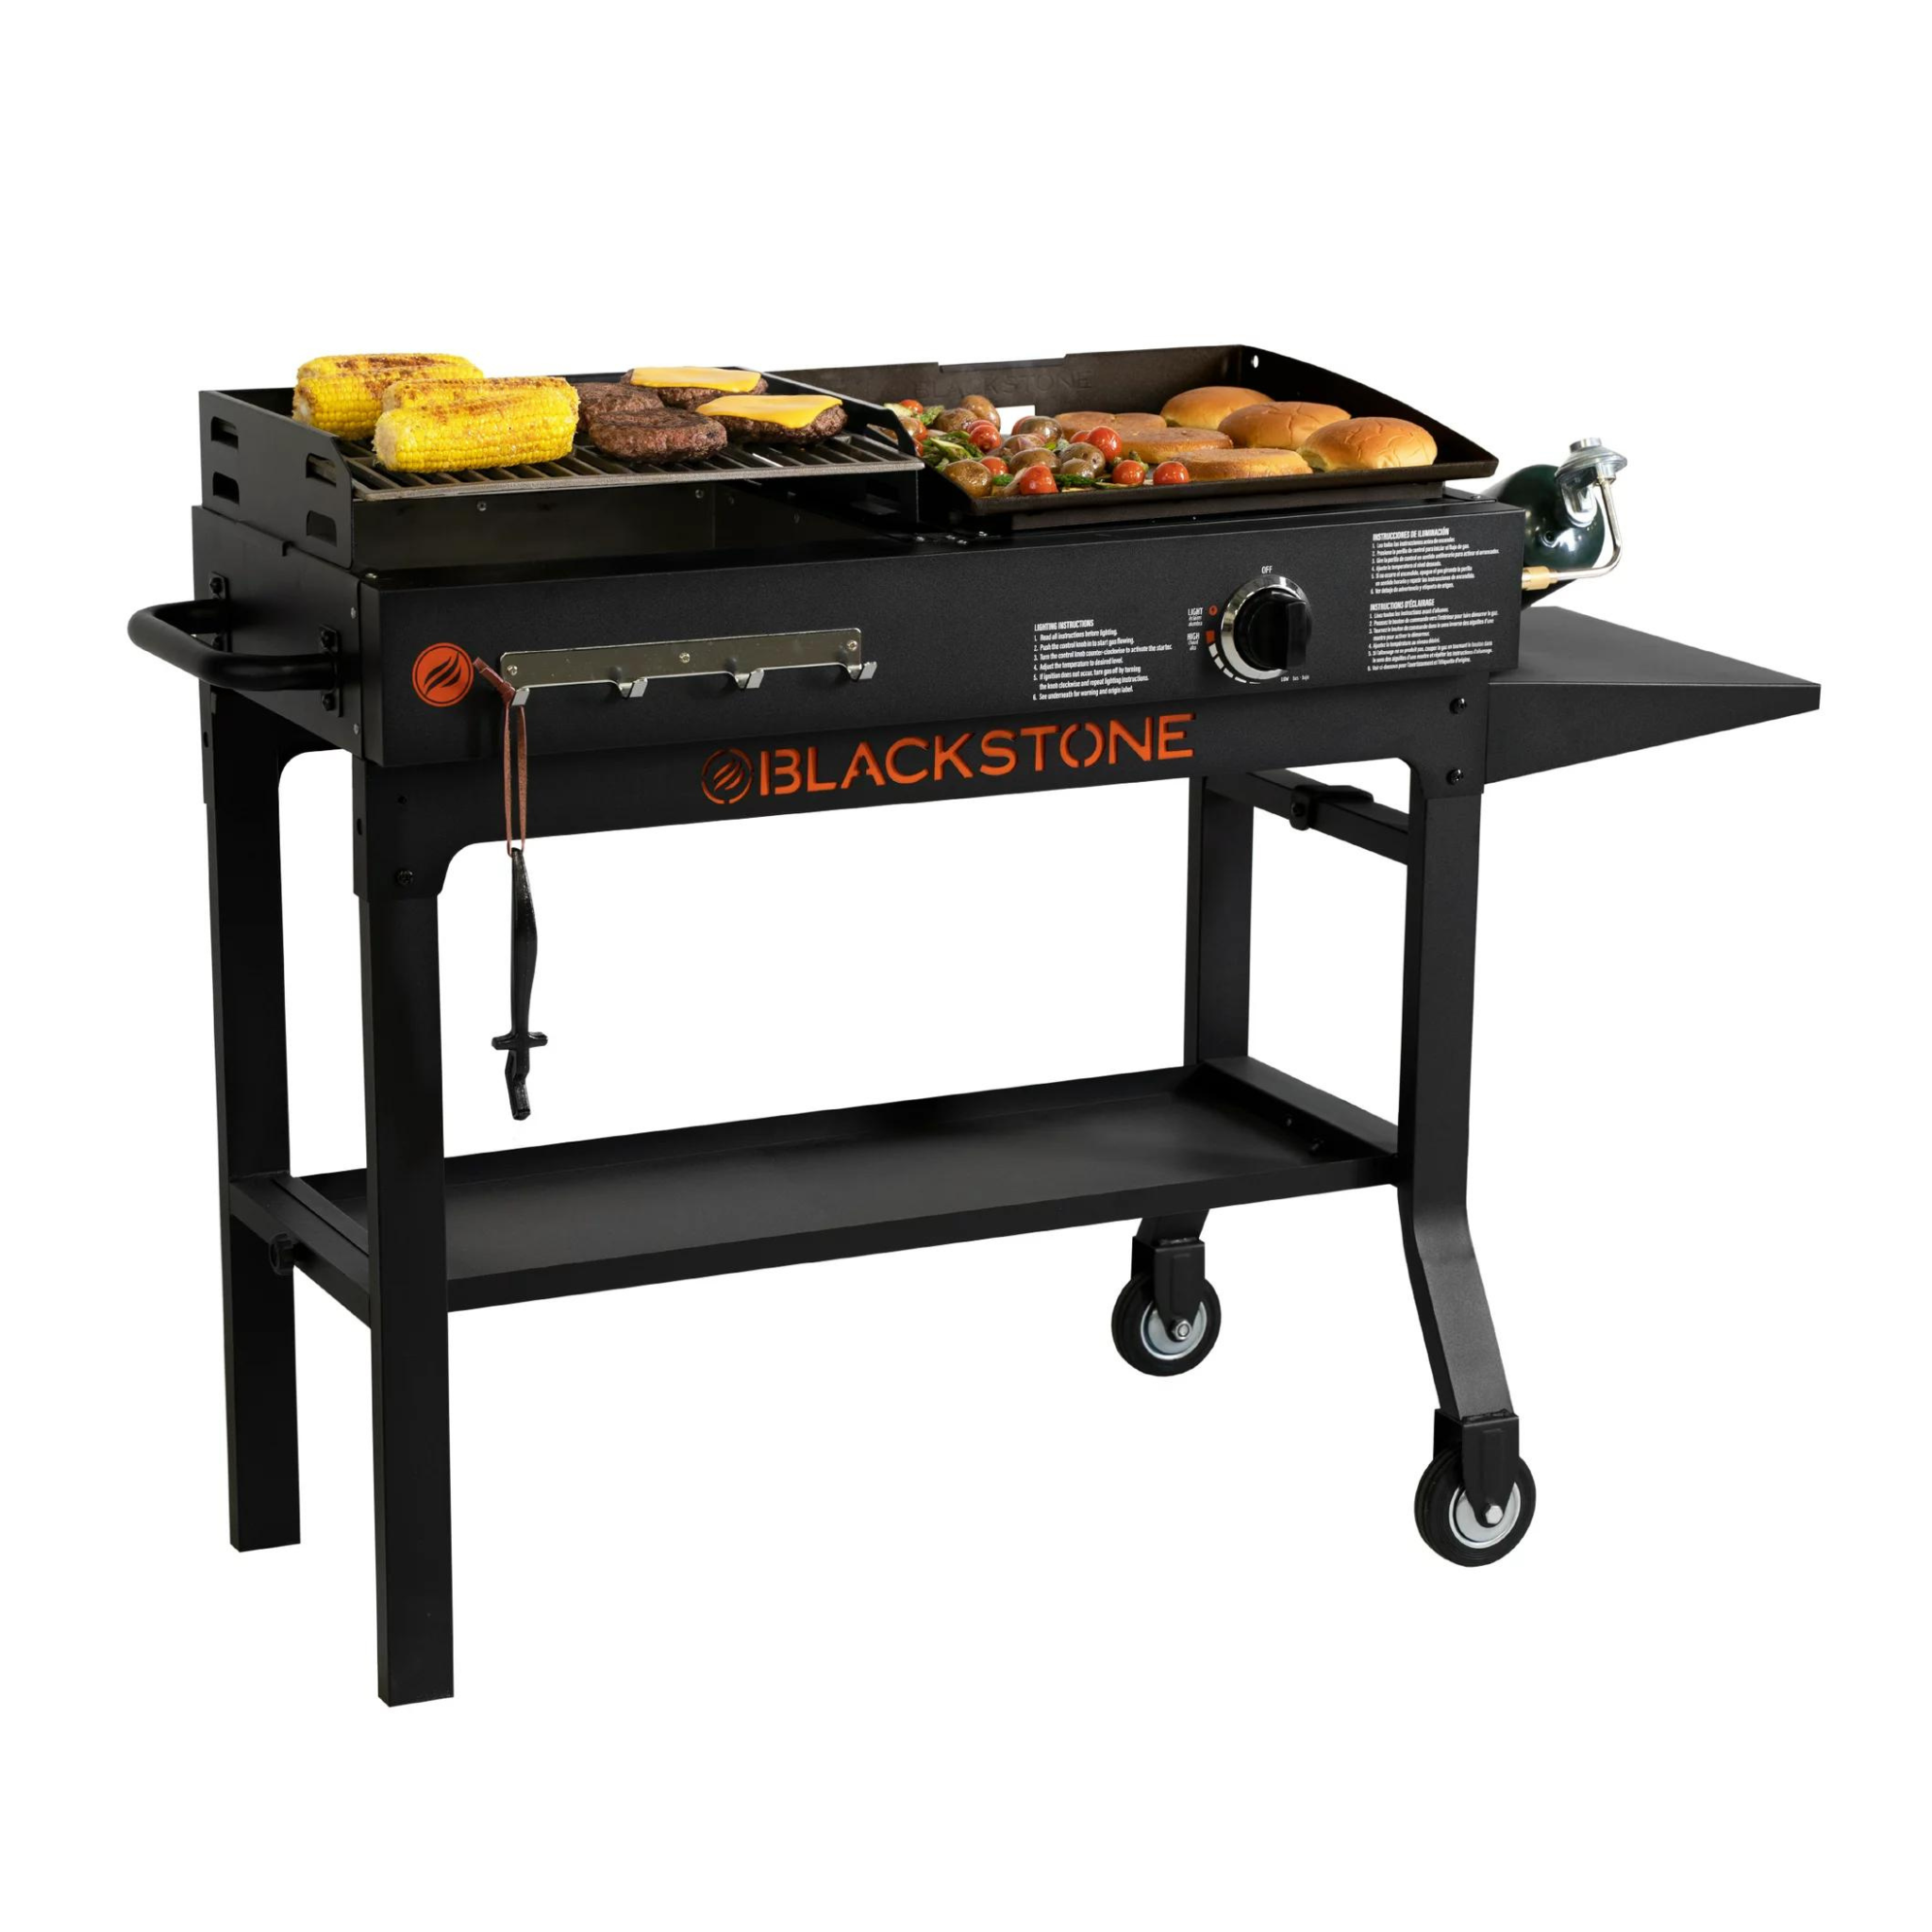 Blackstone Duo 17" Propane Griddle & Charcoal Grill Combo